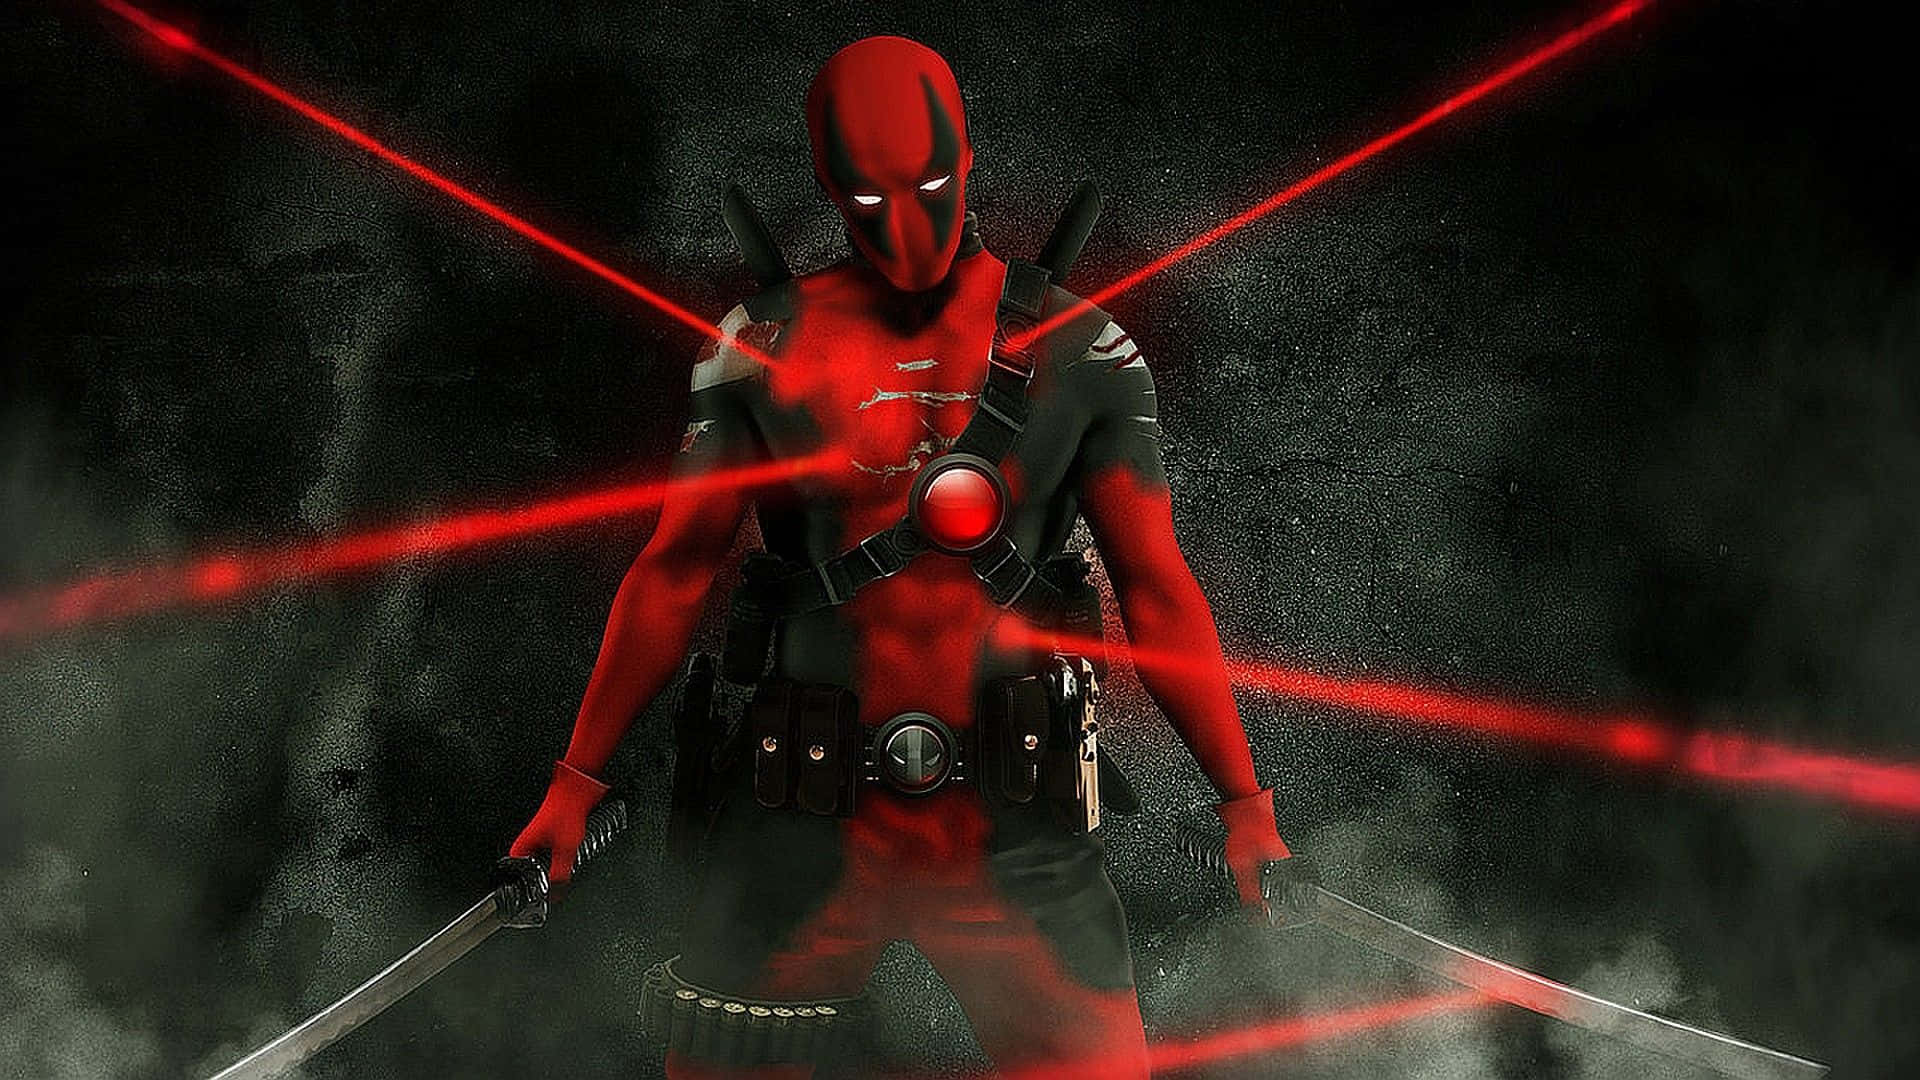 The infamous Deadpool in a cool new black inked suit Wallpaper